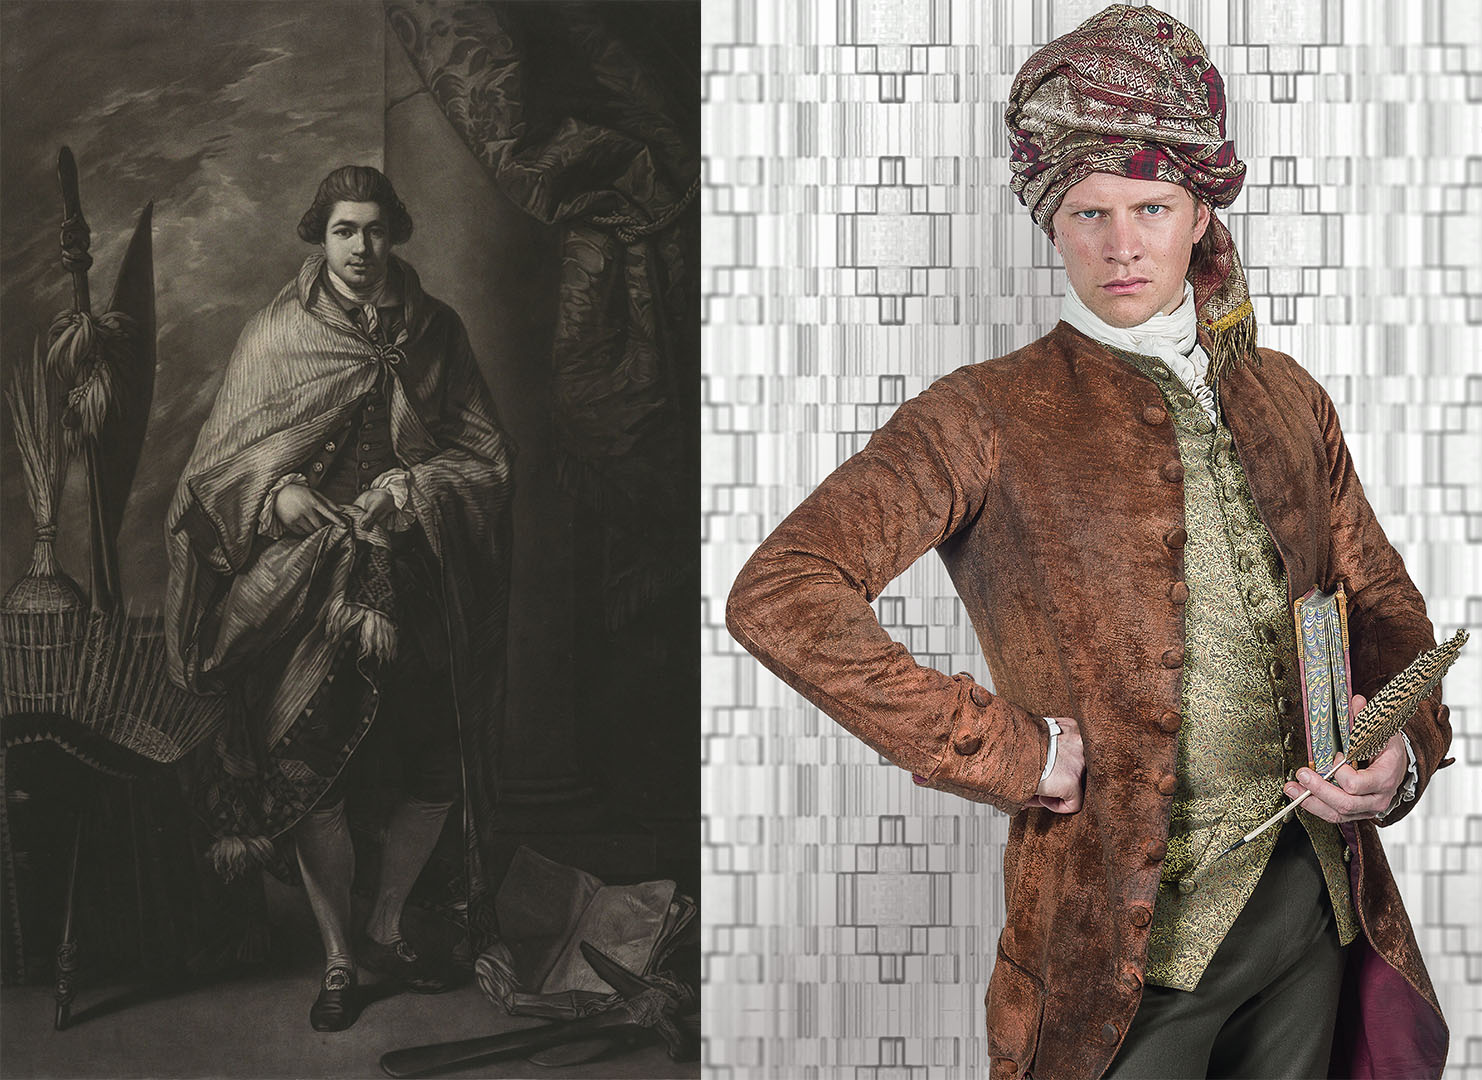 On the left, an illustration of Joseph Banks, on the right, a character poses as Joseph Banks